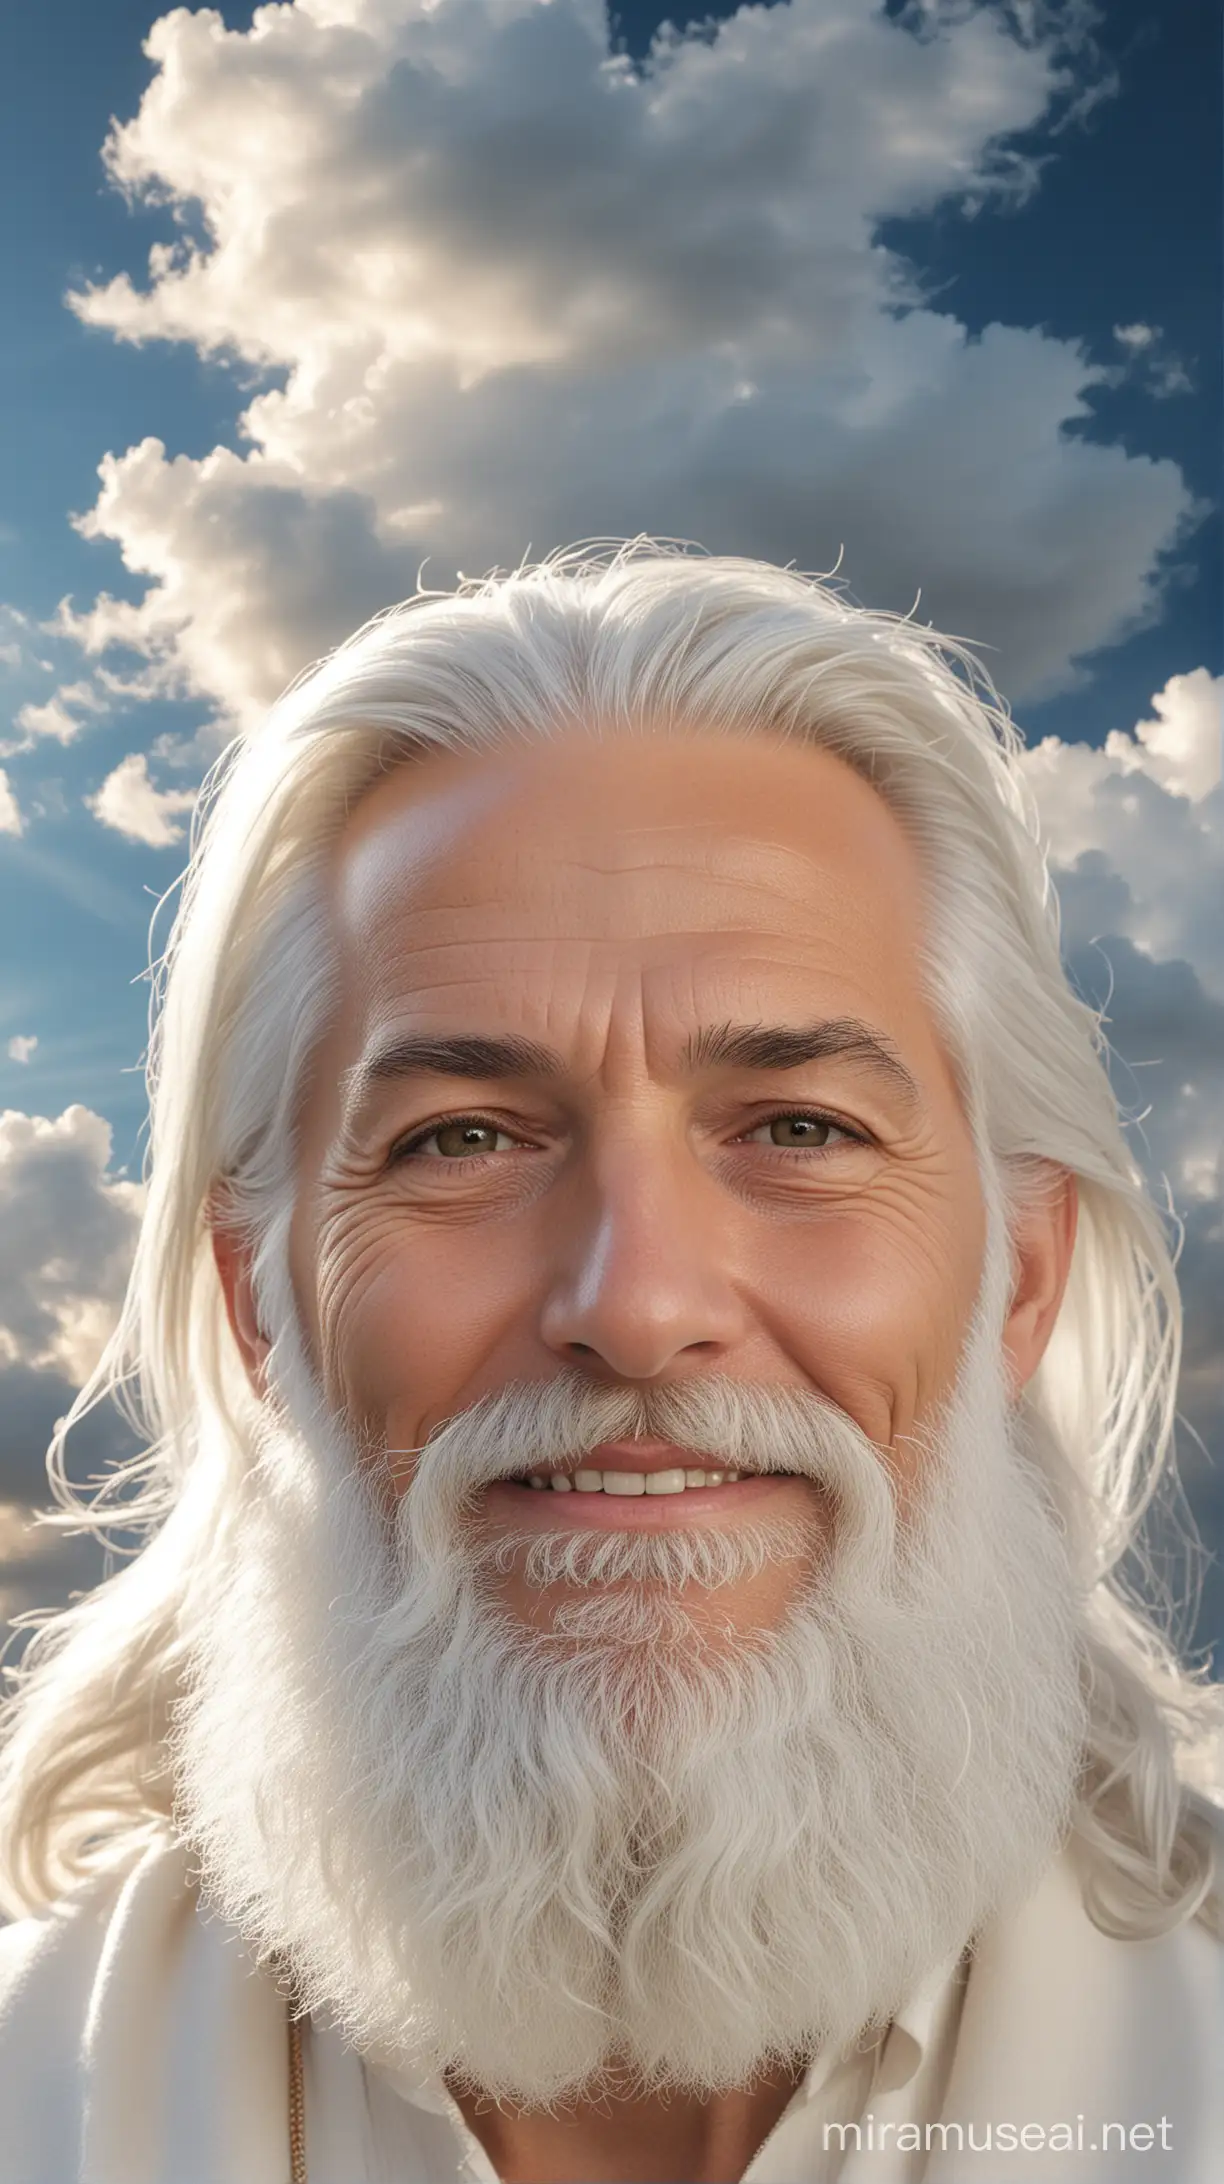 Hyper-realistic photo of God. Subject has a handsome face and contented peaceful smile. Subject has a long white beard. Subject is directly facing the camera. Heavenly clouds and glowing sunlight in background. High definition, raw style.